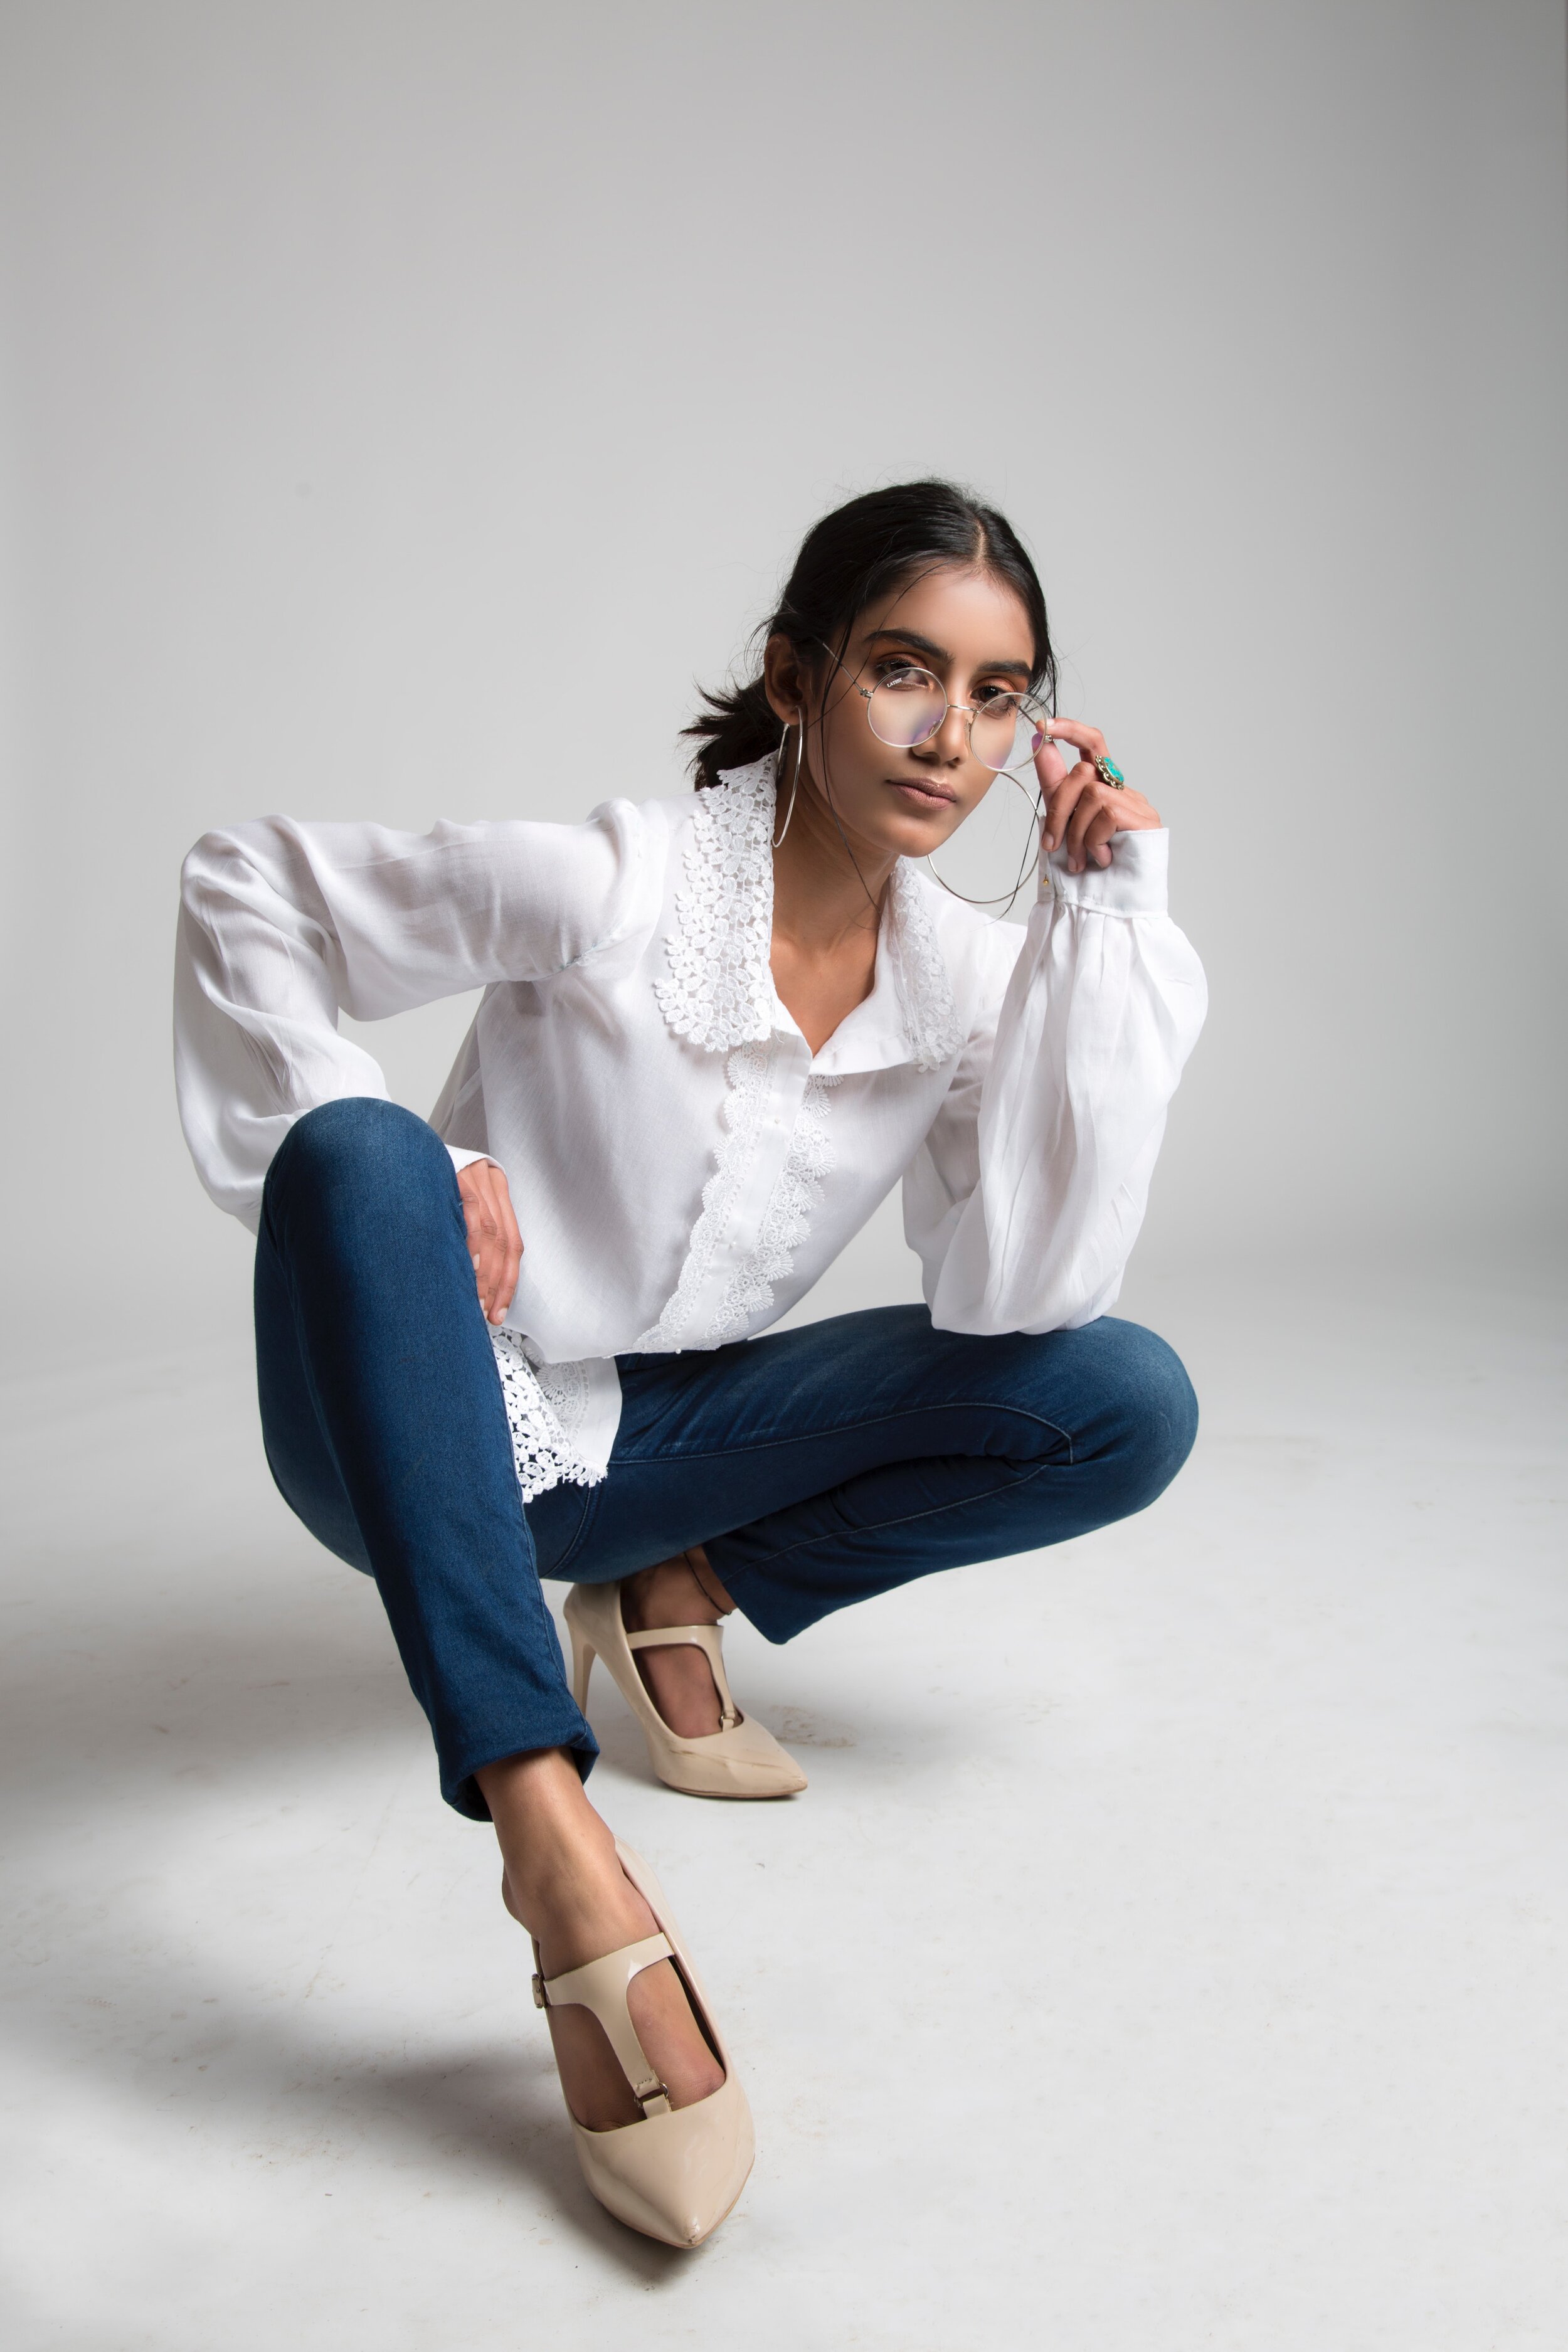 woman-in-white-long-sleeve-shirt-and-blue-denim-jeans-3765976.jpg